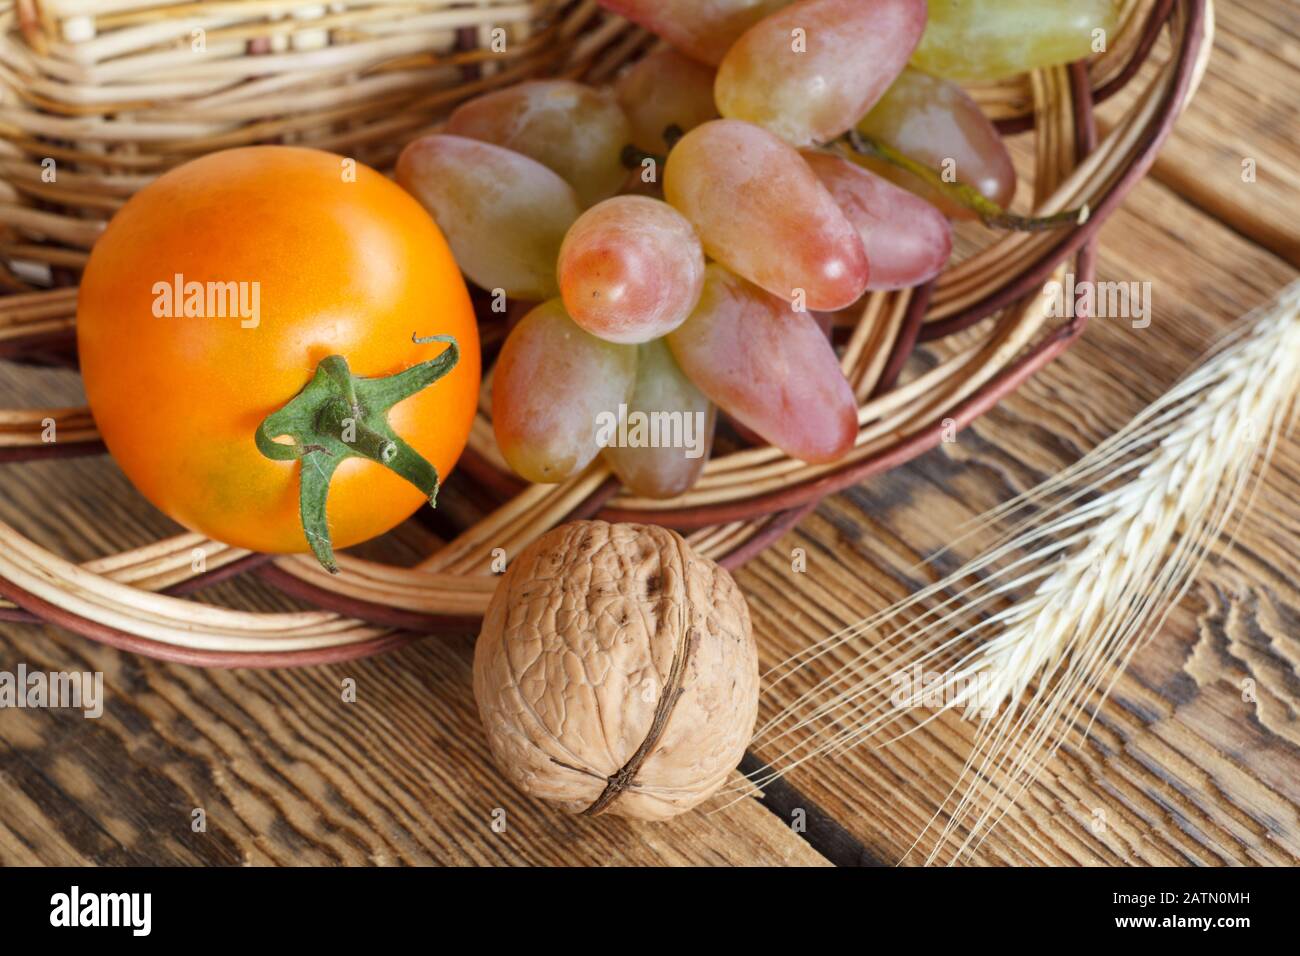 Close-up walnut, tomato, grape and wicker basket on old wooden boards. Shallow depth of field. Top view. Stock Photo